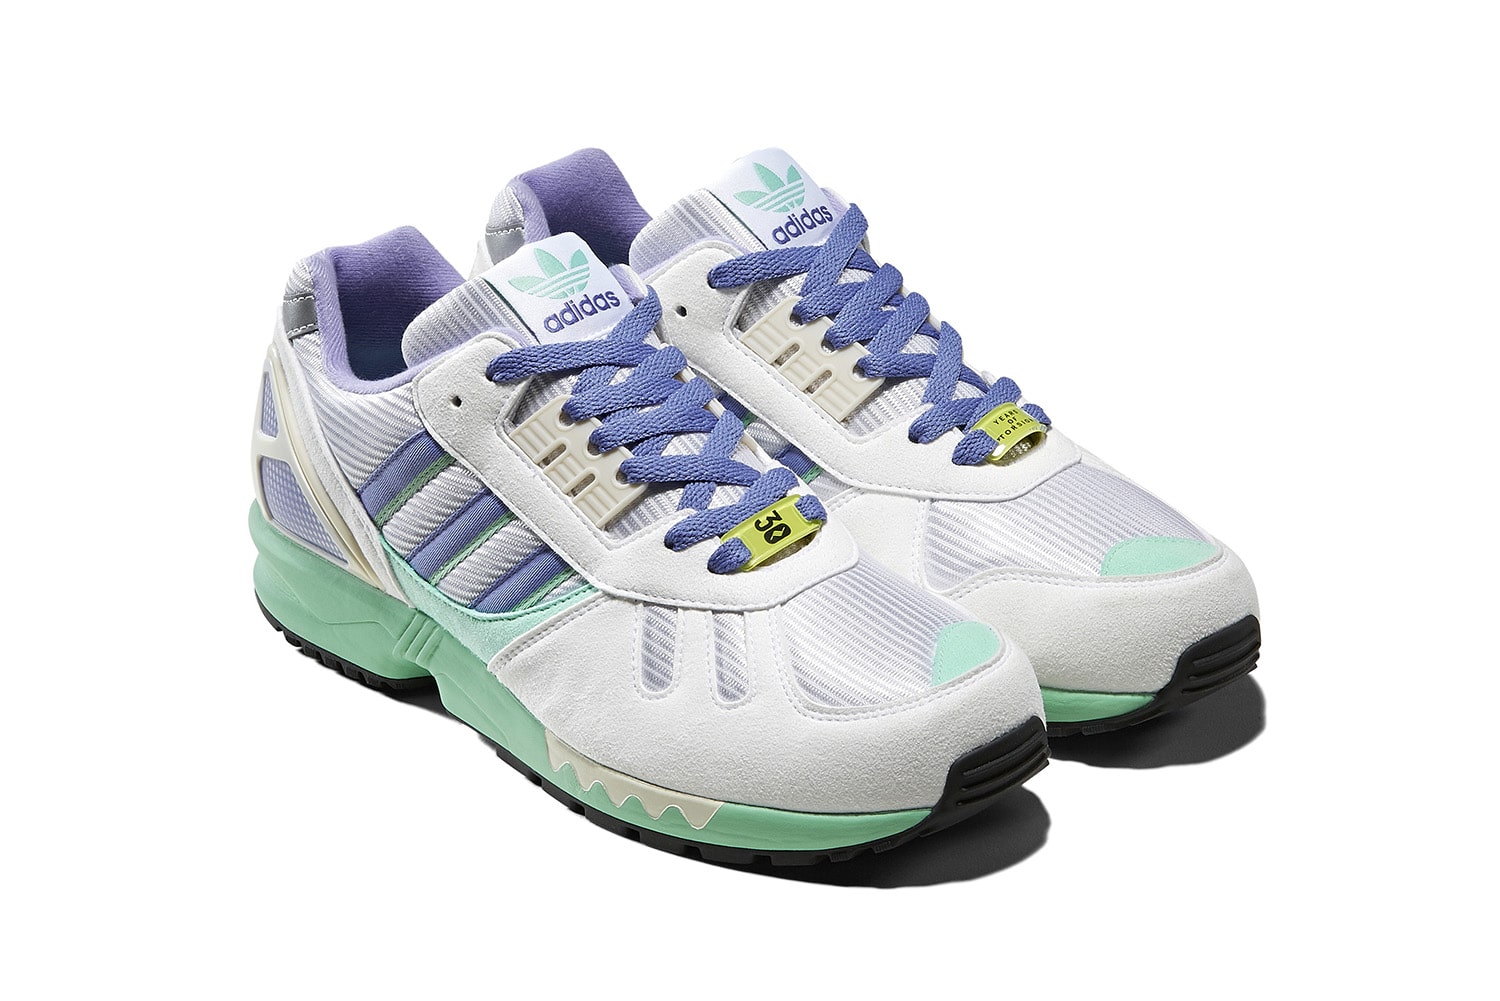 adidas ZX 7000 OG 30 years of Torsion 5